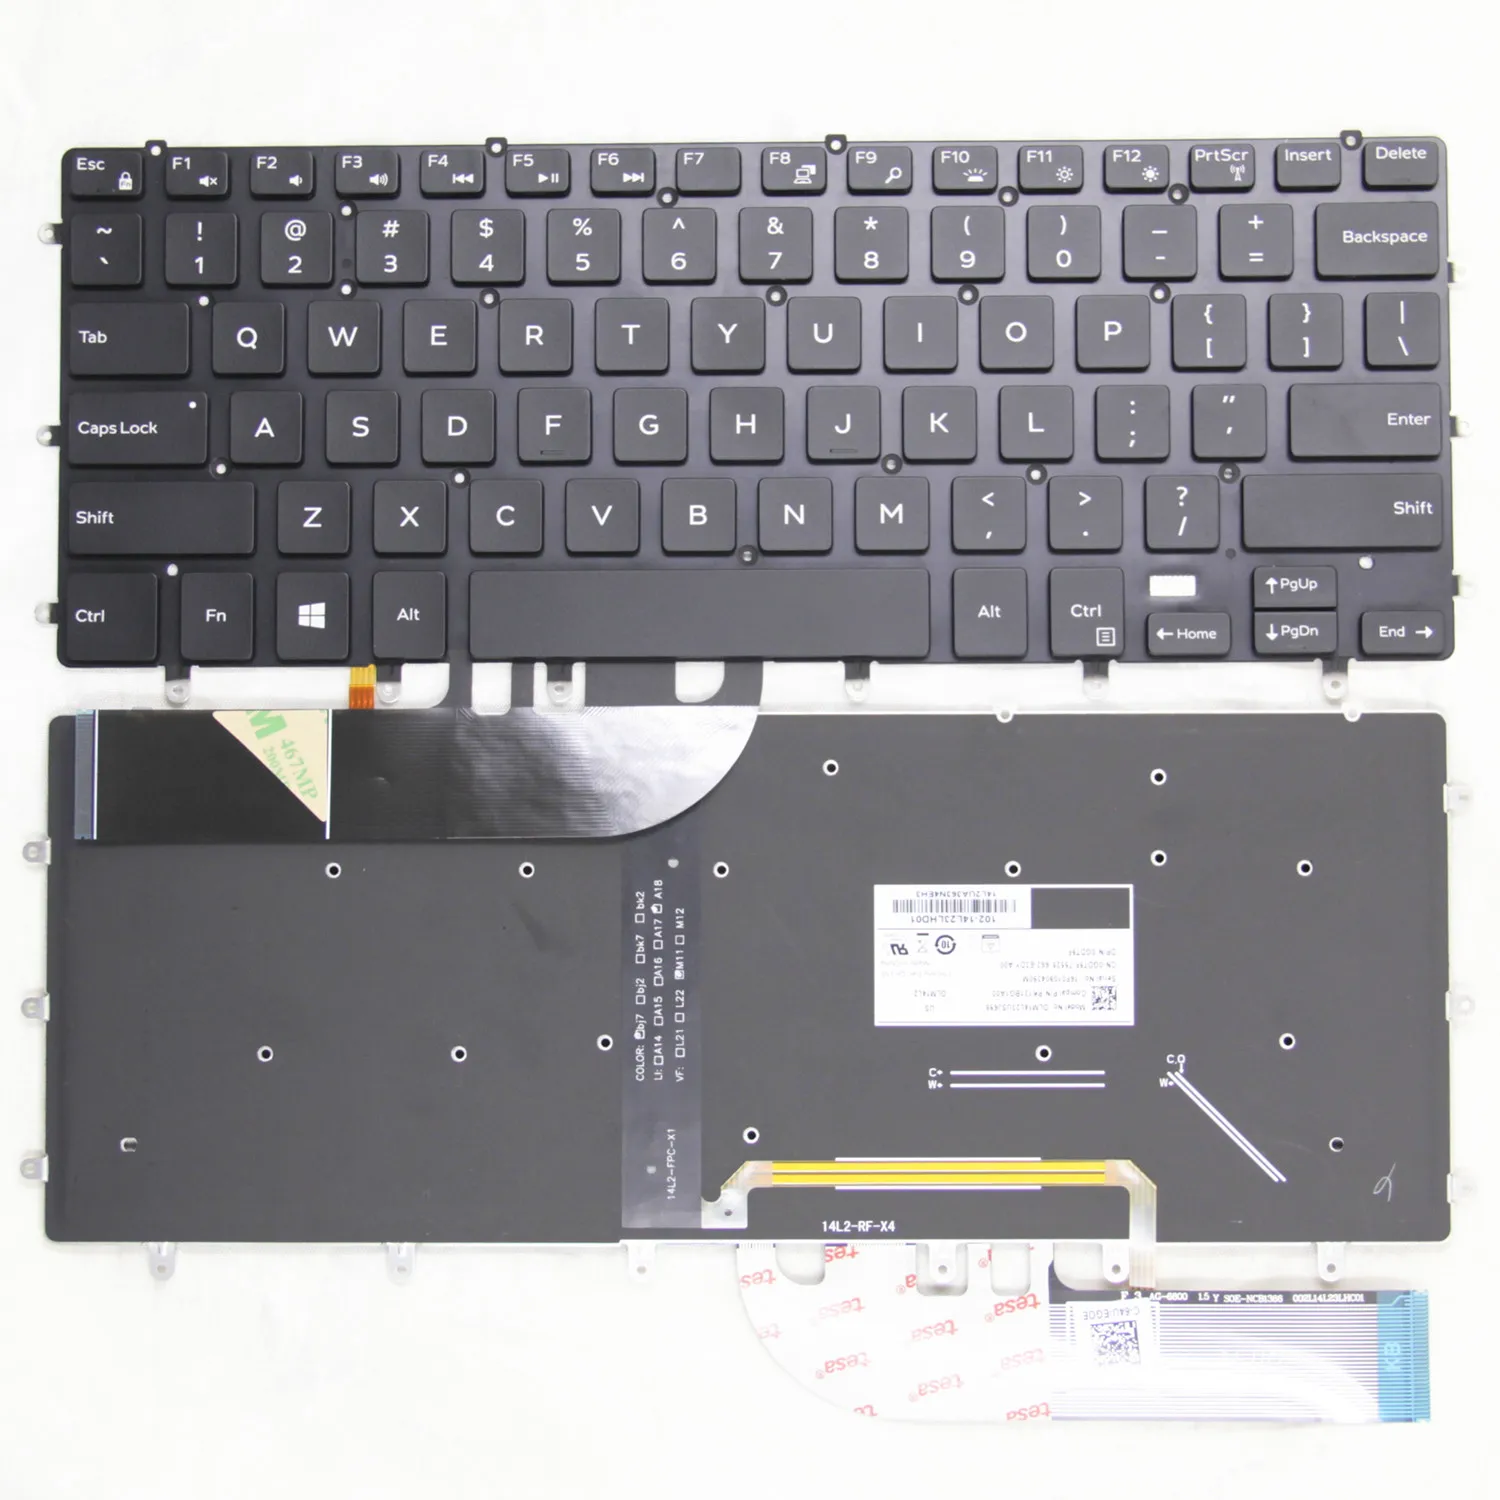 

New Original US/UK(GB)/RU(Russian) FOR DELL XPS 15 9550 9560 9570 M5510 Inspiron 15 7558 7568 7590 P56F Laptop Keyboard Backlit